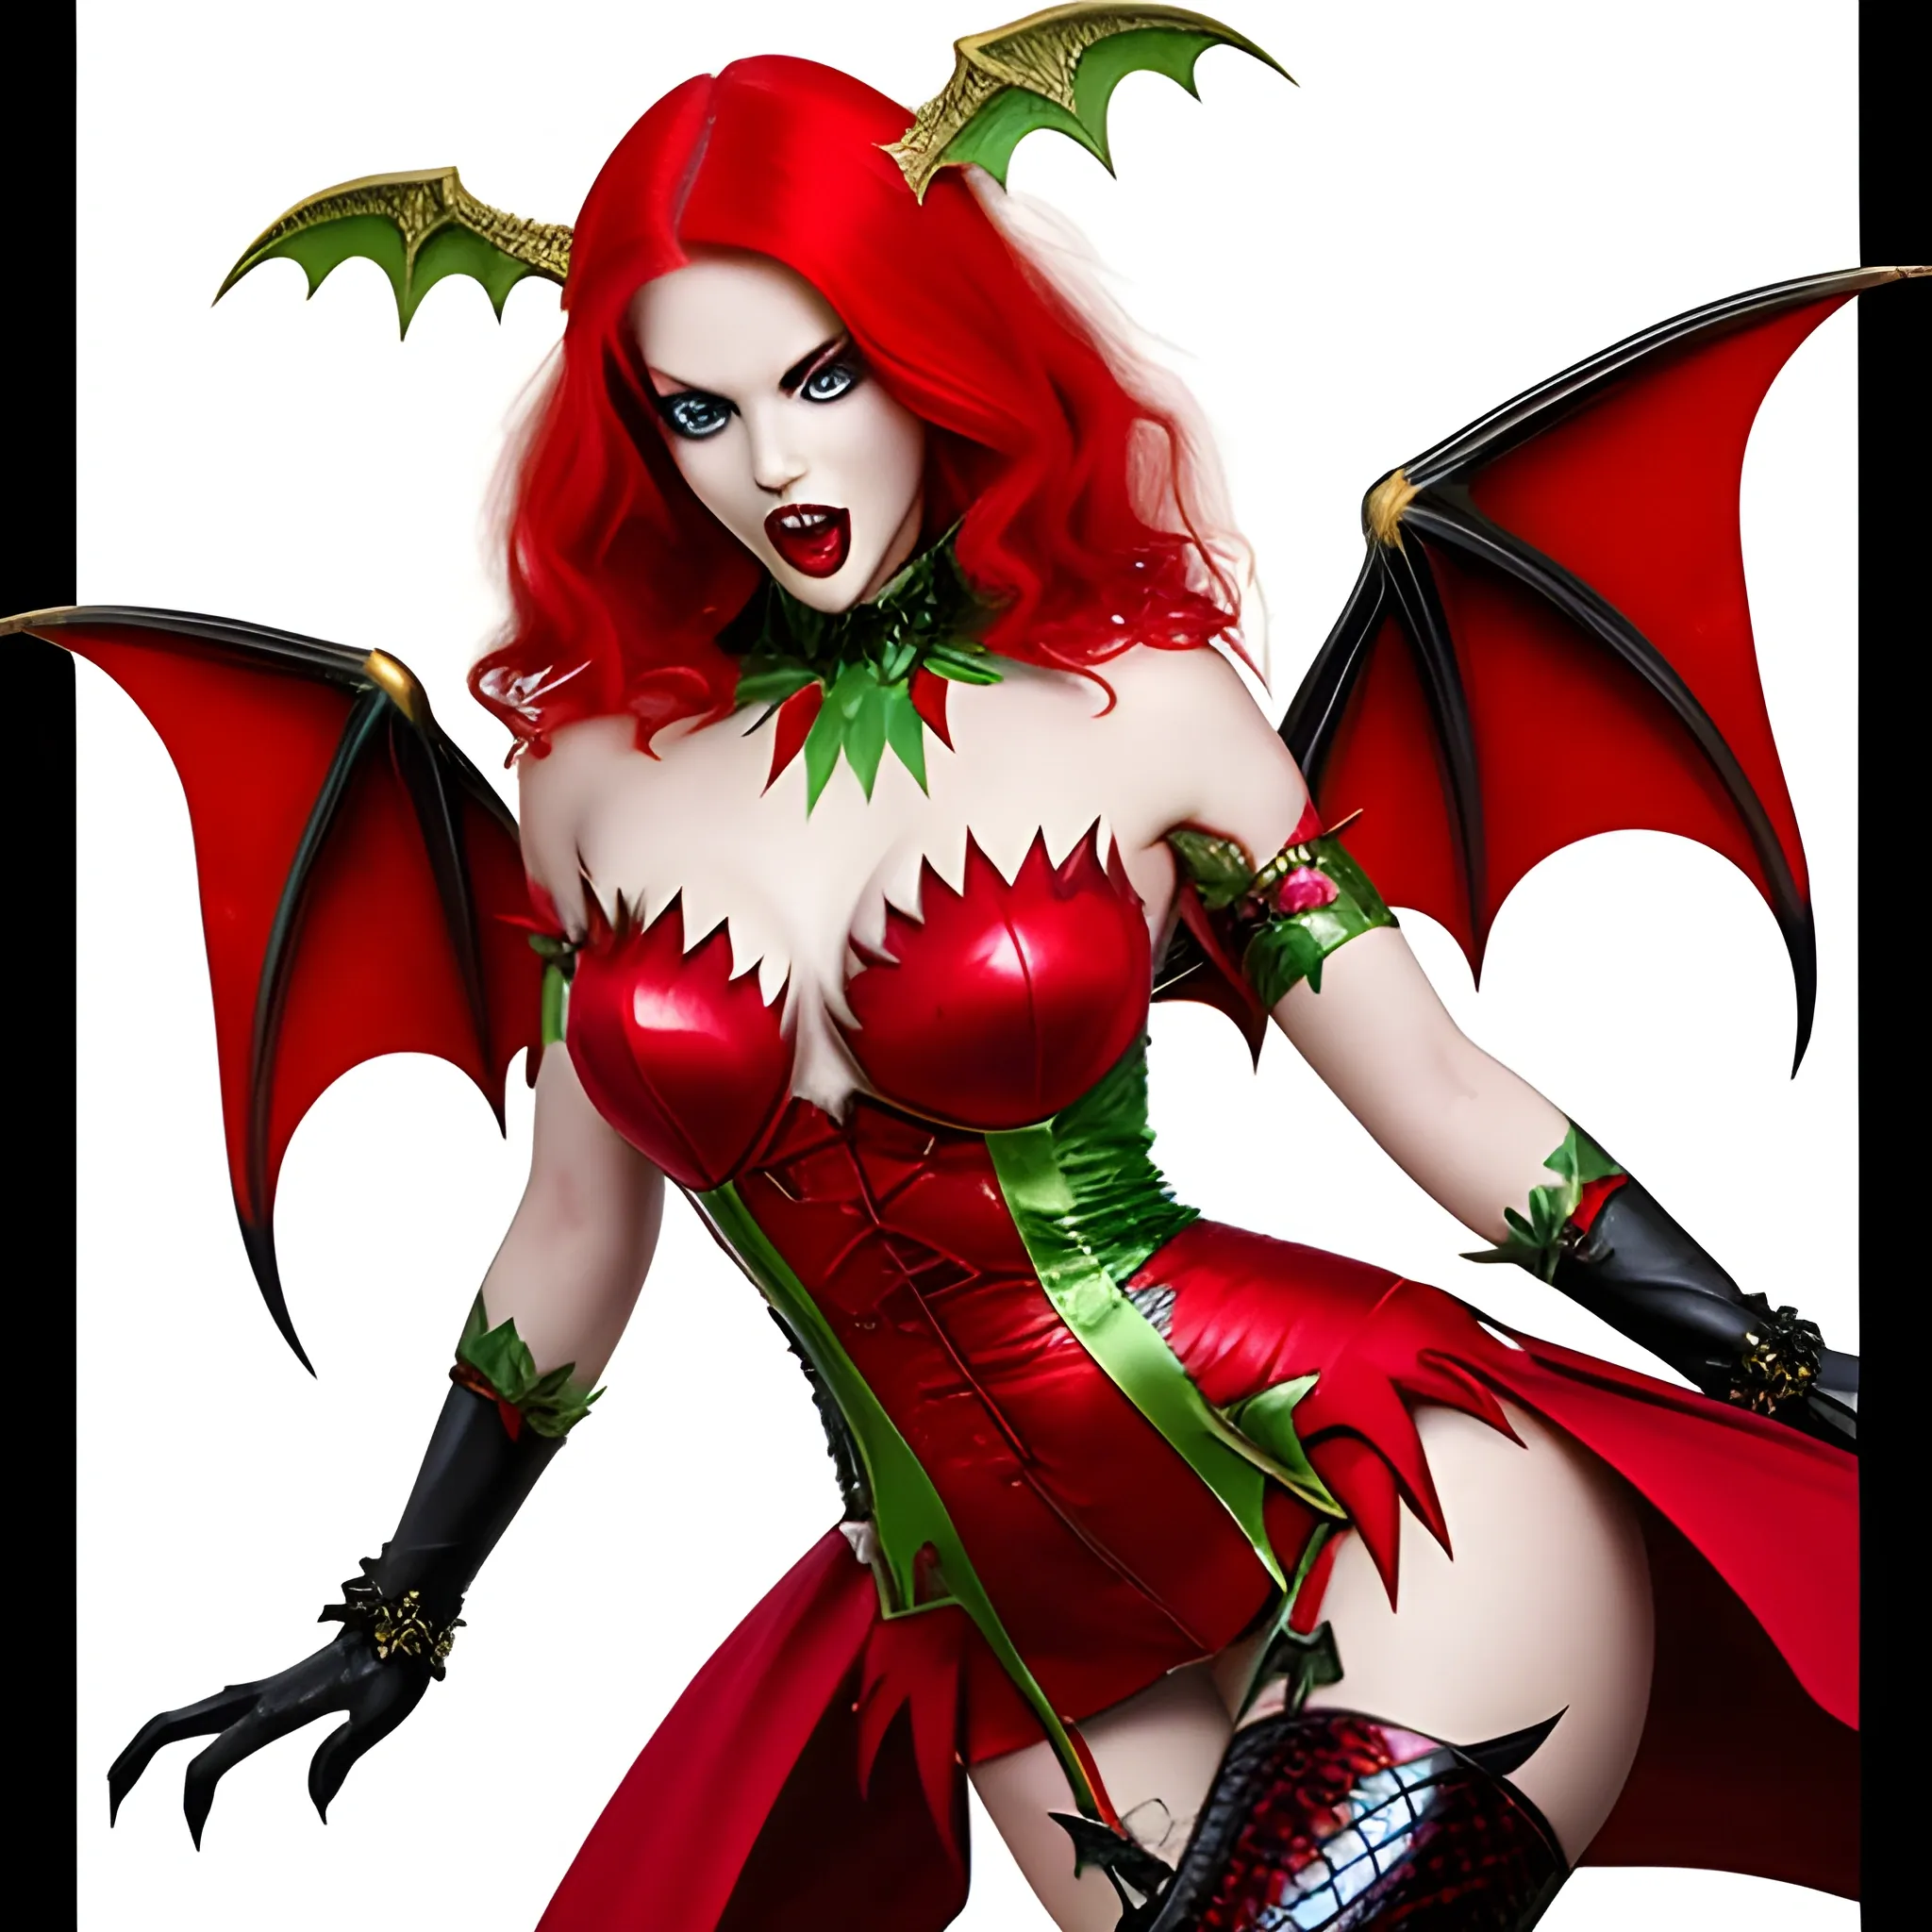 Photo of beautiful dragon-woman. Red dress. Green eyes, gold hair, green wings, black stockings, red high heeled shoes, sharp teeth, claws